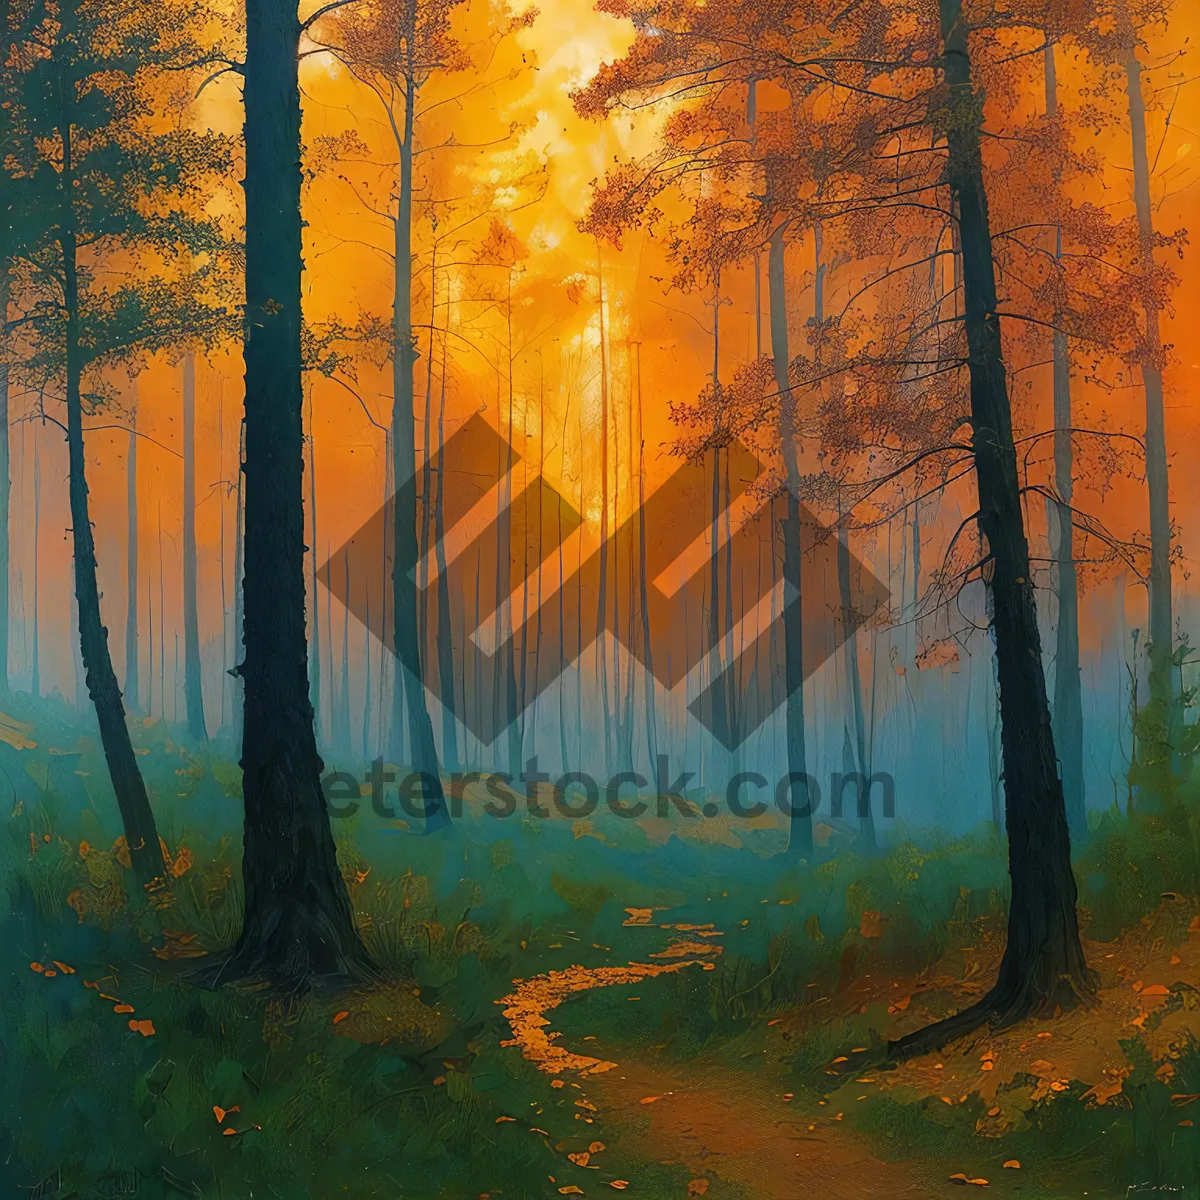 Picture of Autumn Serenity: A Sunlit Forest Landscape